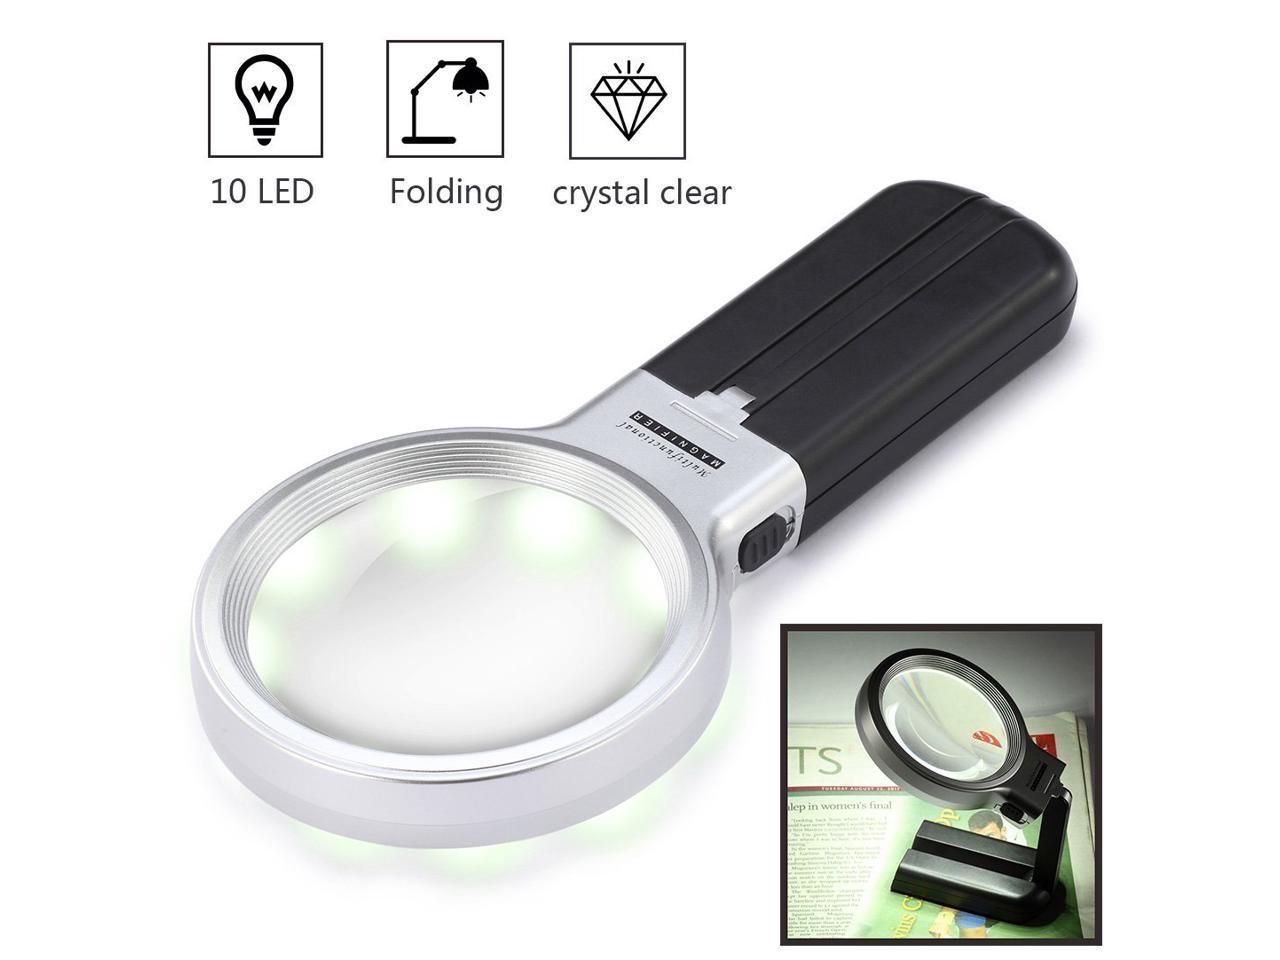 Inspection Lightweight Handheld for Reading Jewellery Magnifying Glass with Light 70mm, Black+White MJIYA LED Illuminated Magnifier with 3X 45X High Magnification 